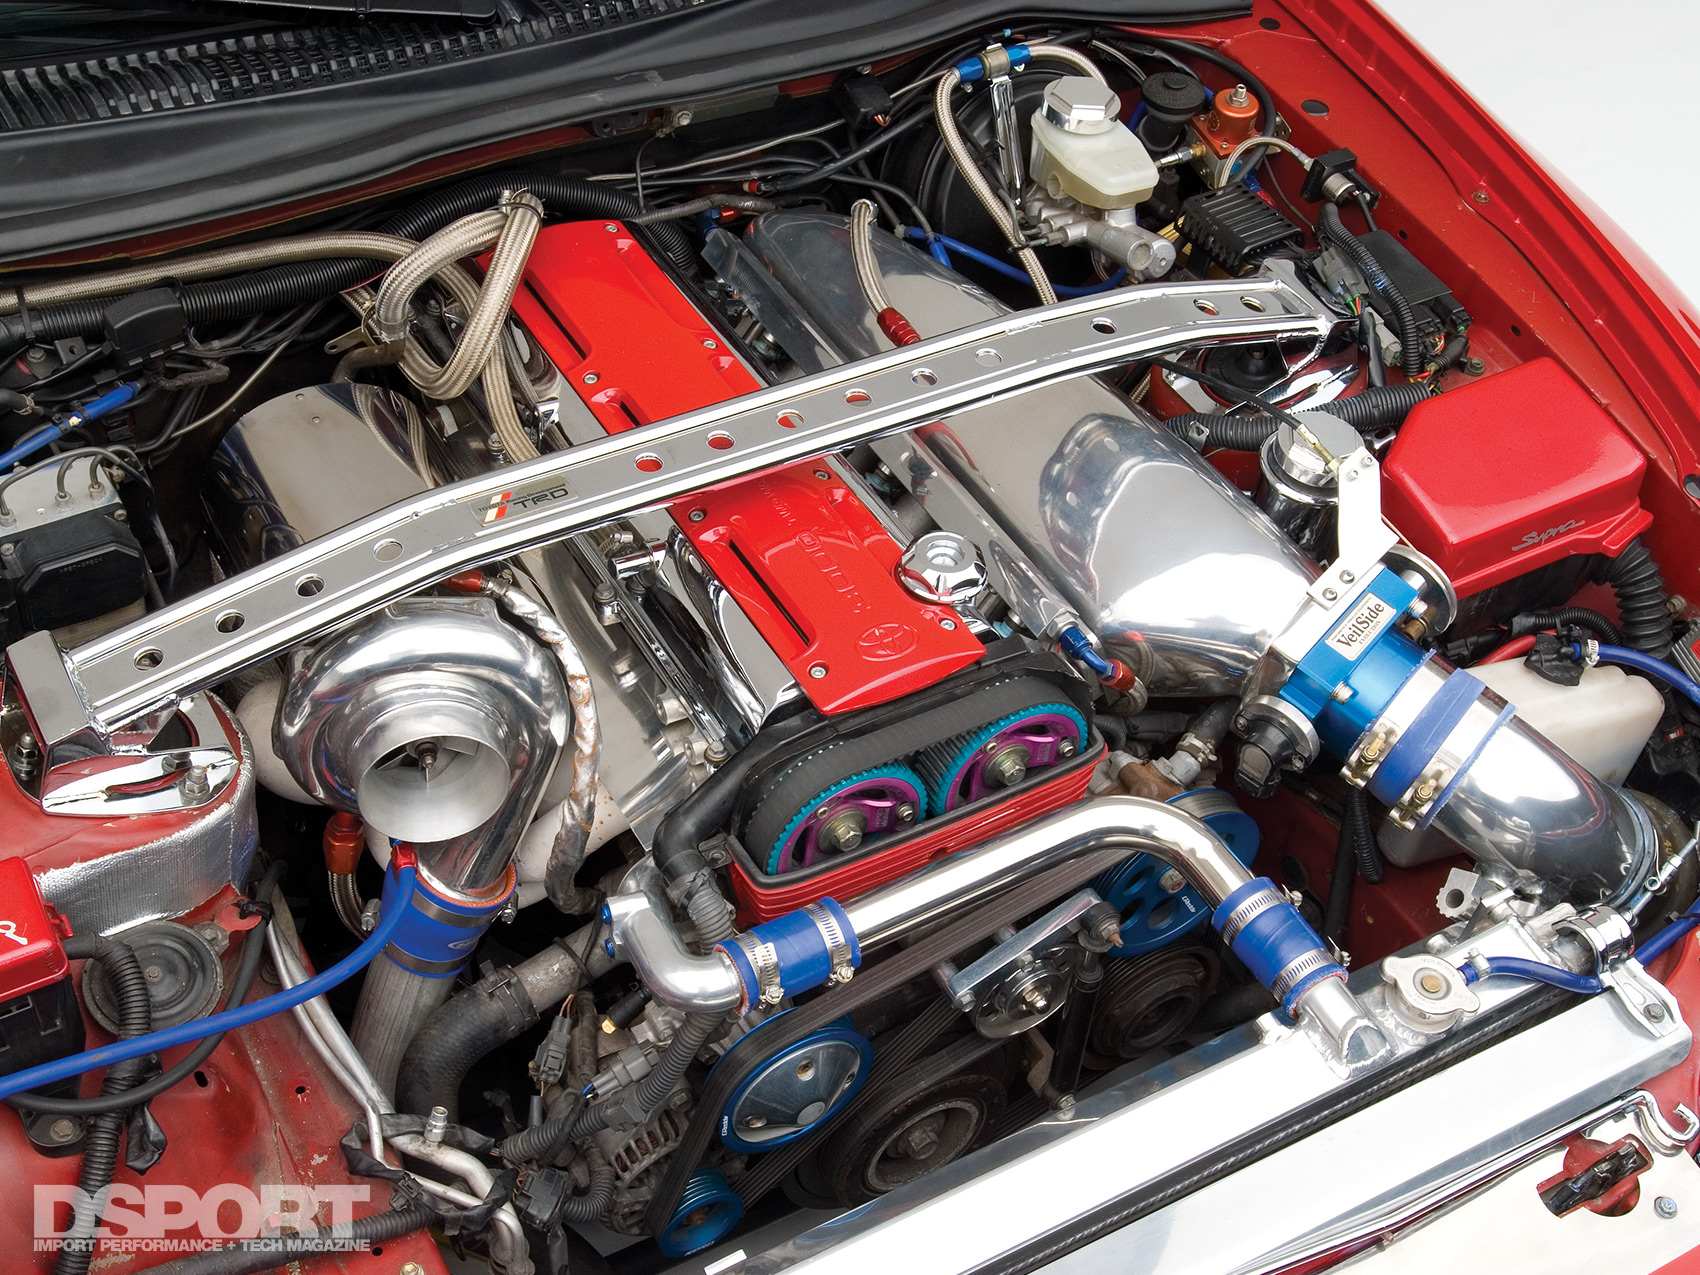 The 2JZ-GTE engine bay on Tony's 9 second Supra.